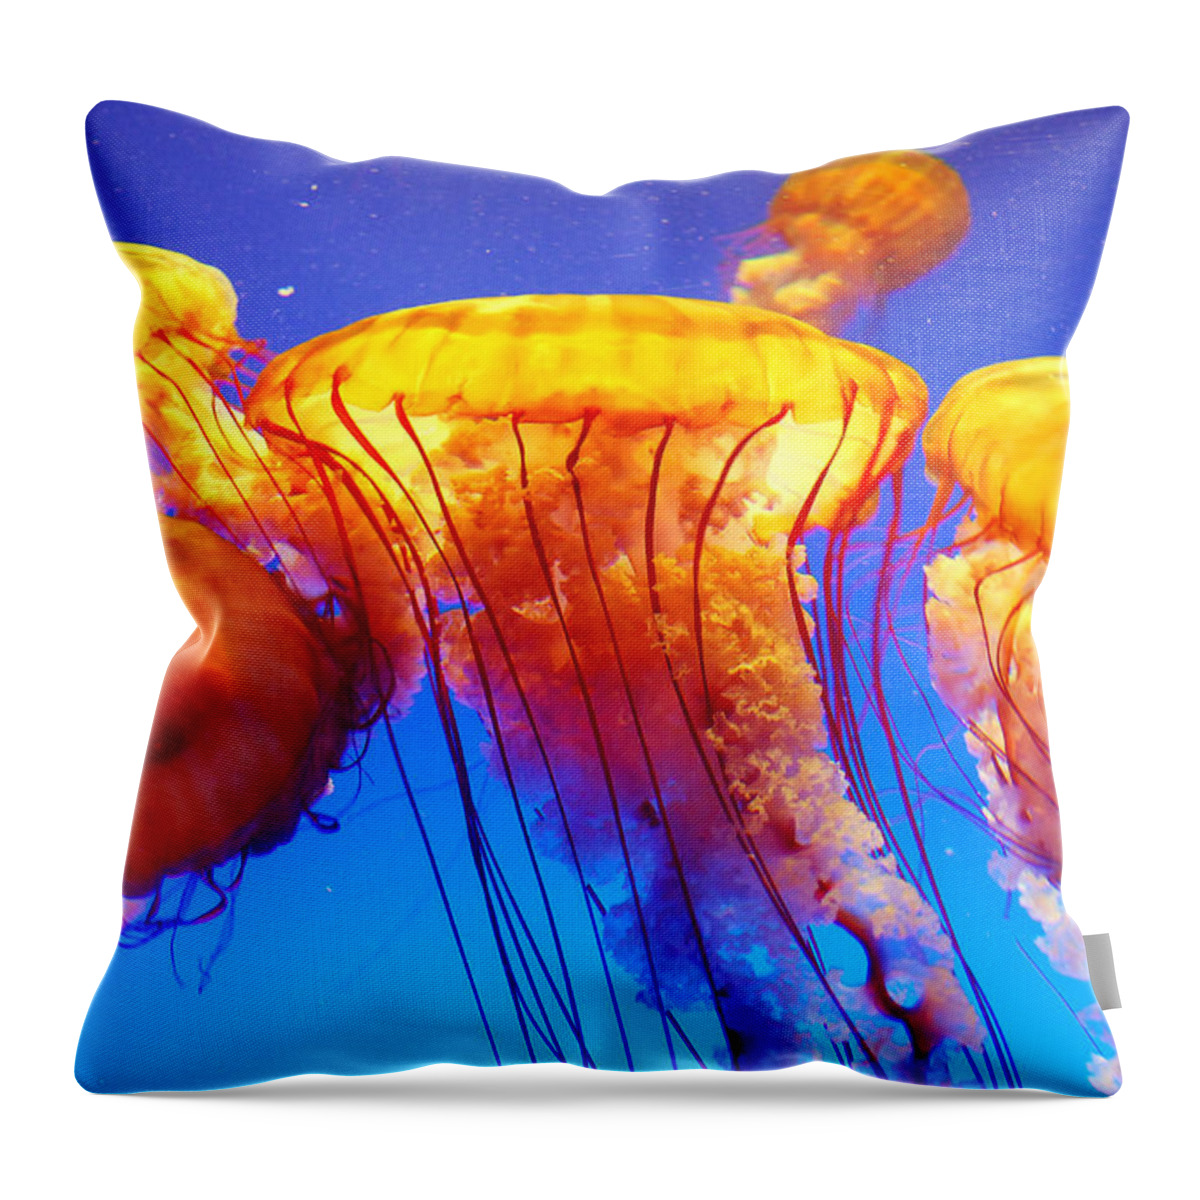 Atlanta Throw Pillow featuring the photograph Five Golden Rings by Copyright © Steve Grundy (stgrundy)